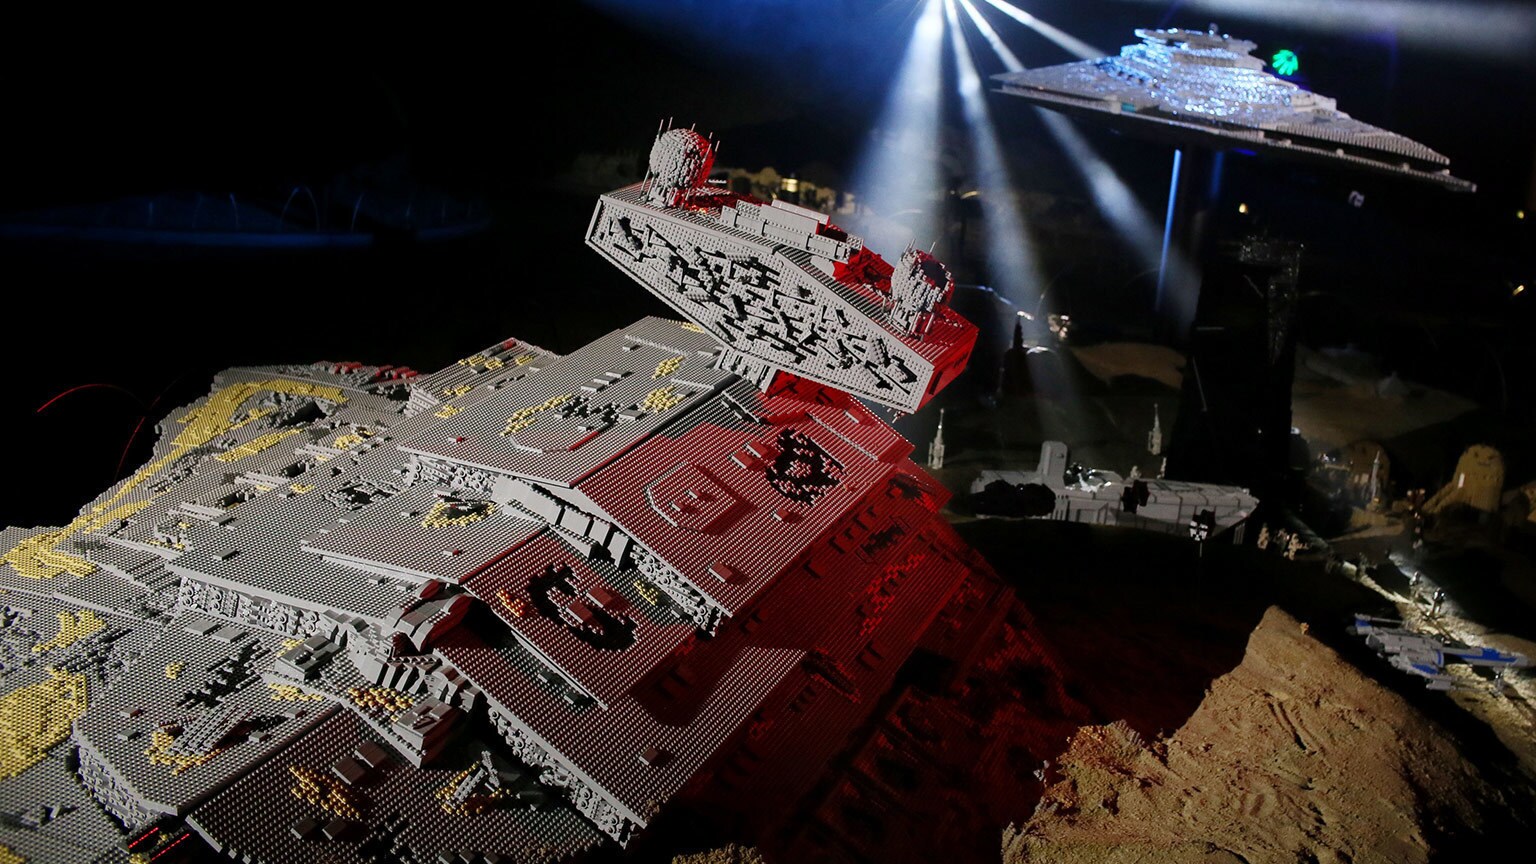 7 Bricktastic Details About LEGOLAND California's New The Force Awakens Display